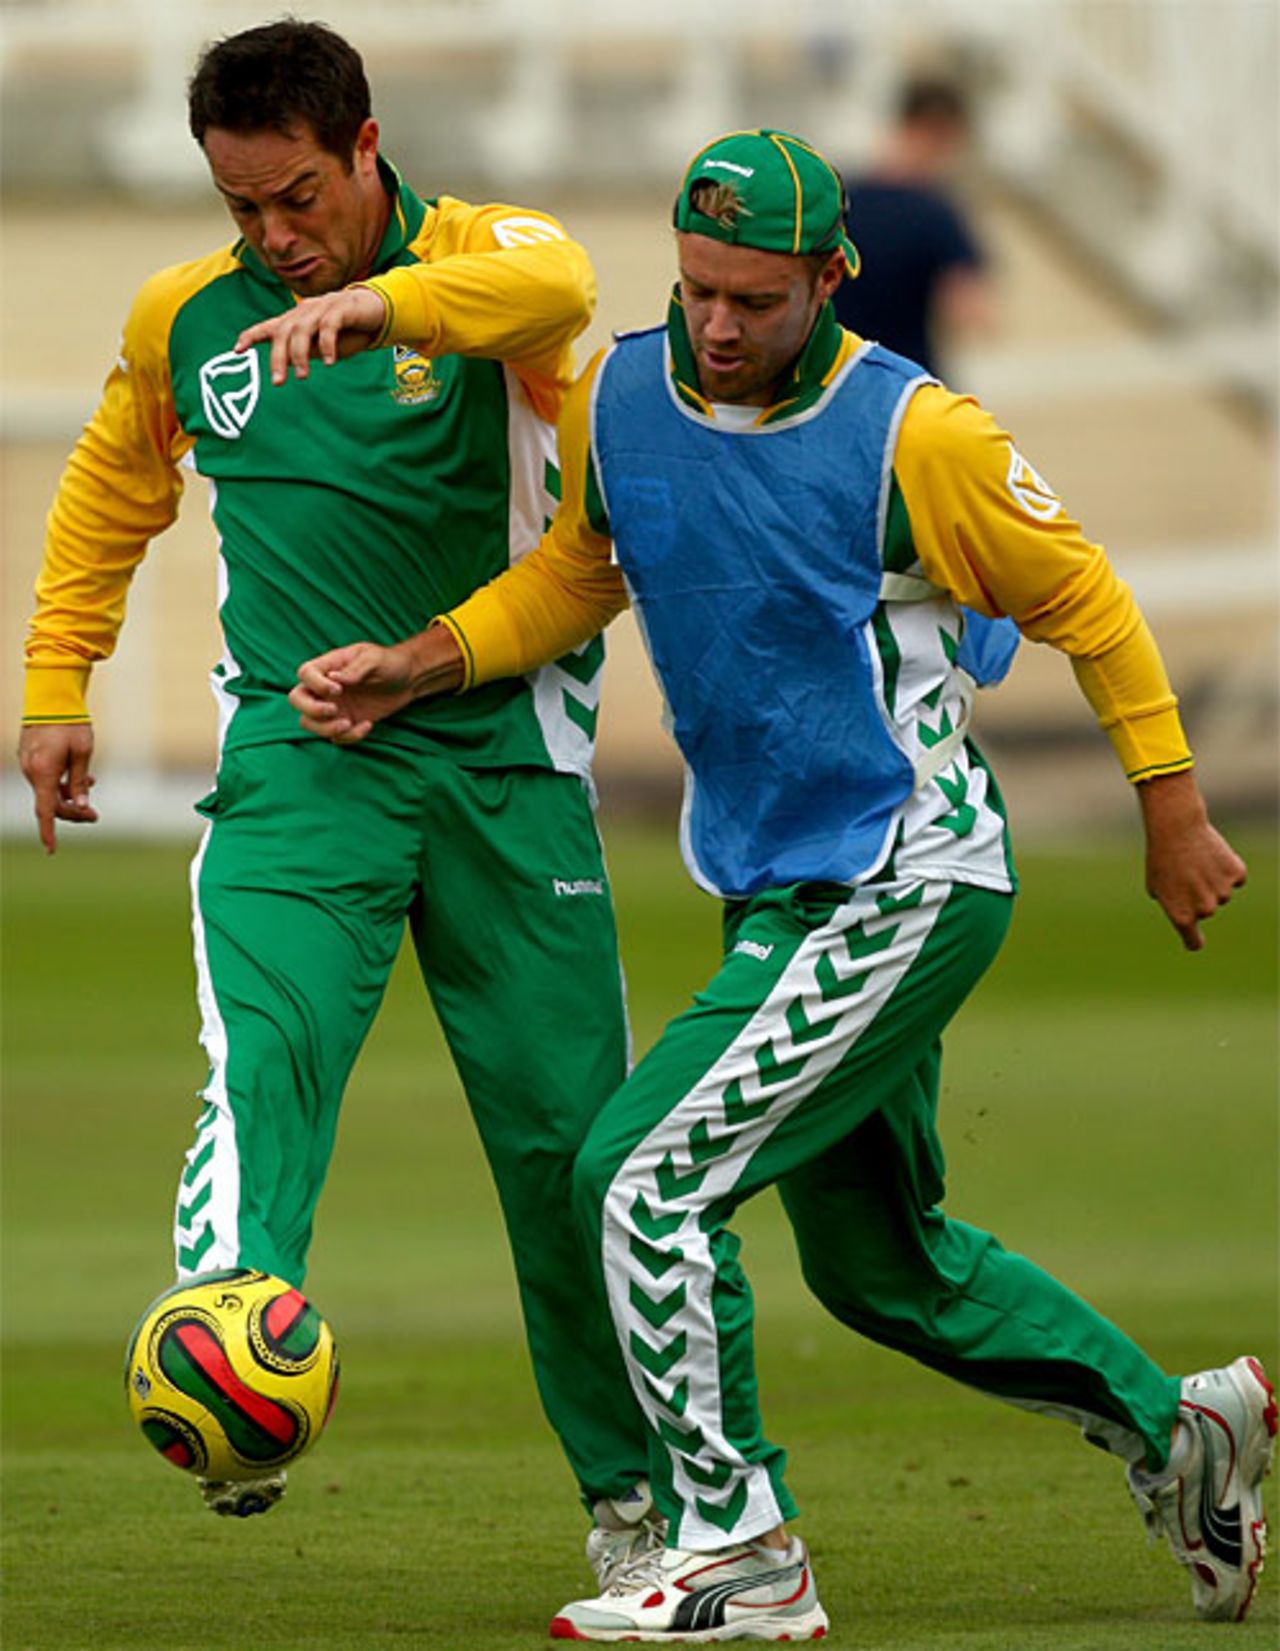 Mark Boucher and AB de Villiers engage in some practice ahead of the one-dayer at Trent Bridge, Trent Bridge, August 25, 2008